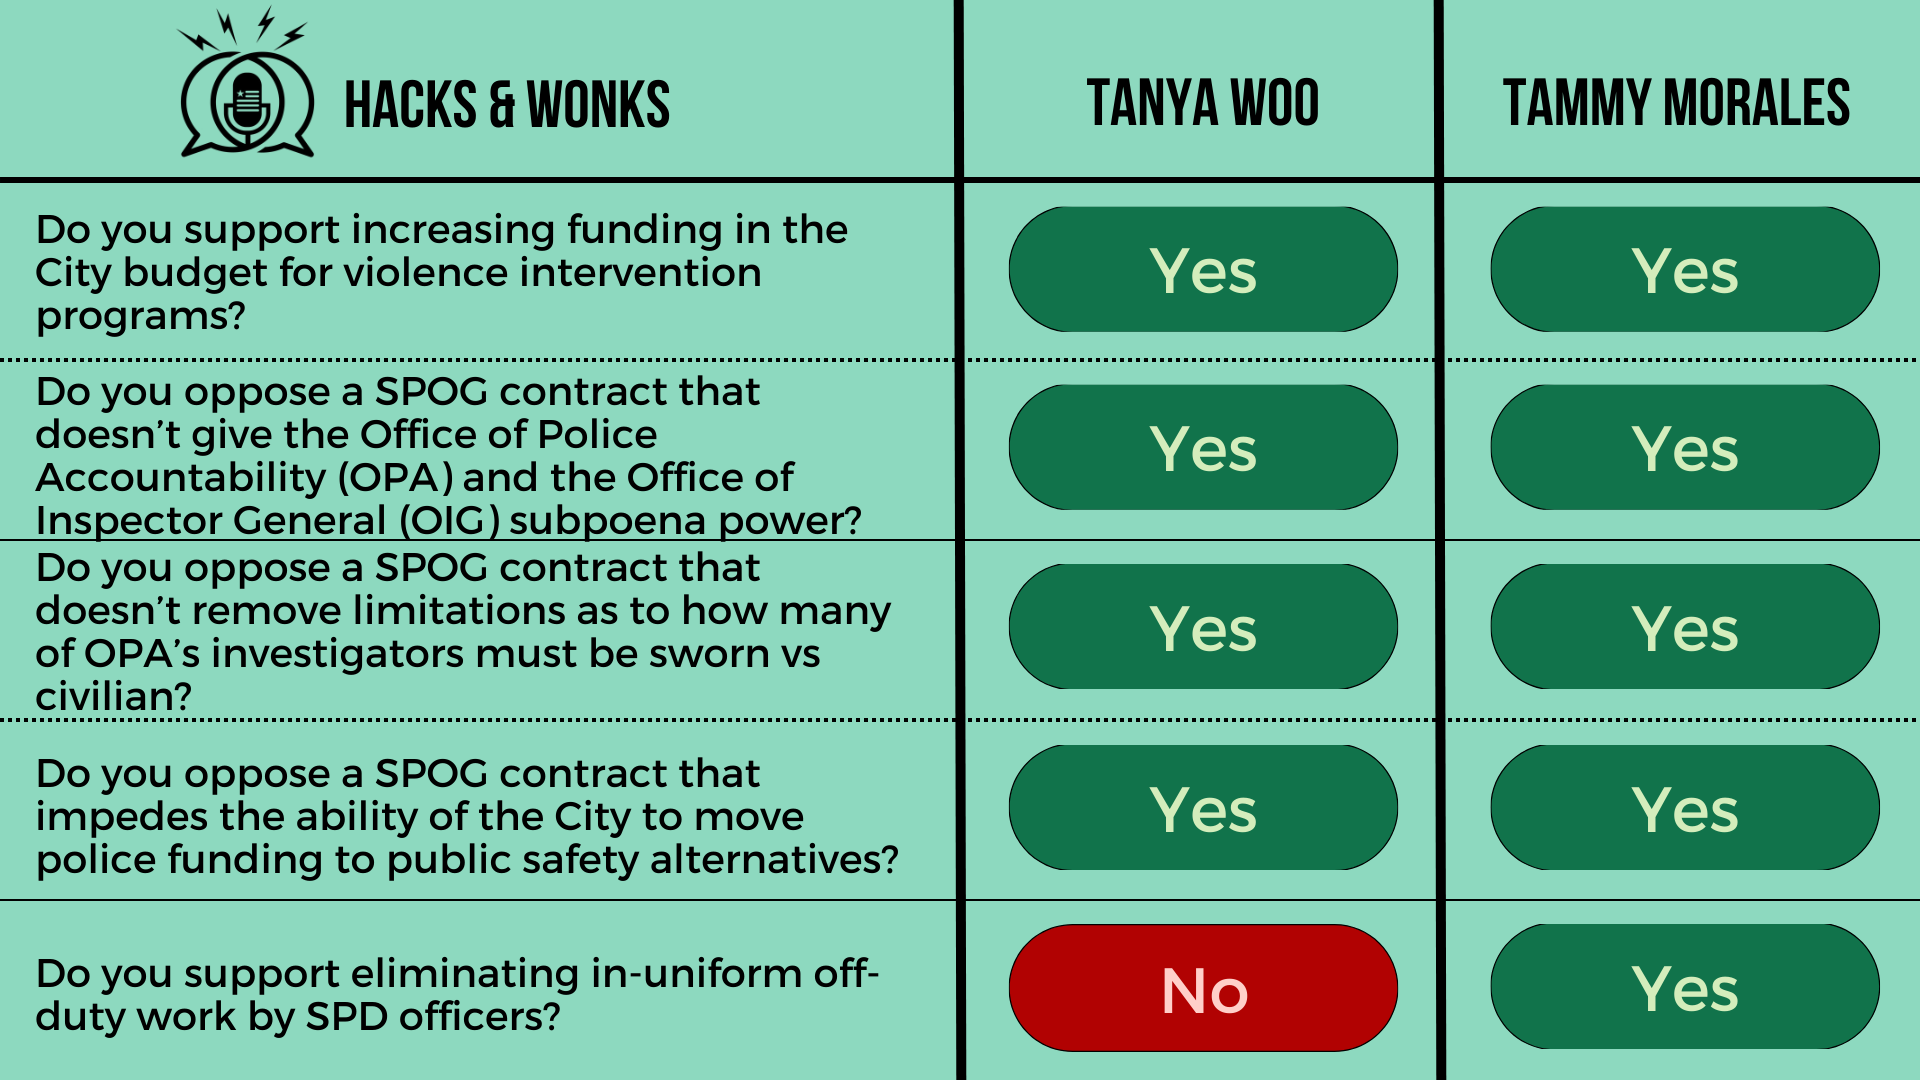 Q: Do you support increasing funding in the City budget for violence intervention programs? Tanya Woo: Yes, Tammy Morales: Yes  Q: Do you oppose a SPOG contract that doesn’t give the Office of Police Accountability (OPA) and the Office of Inspector G